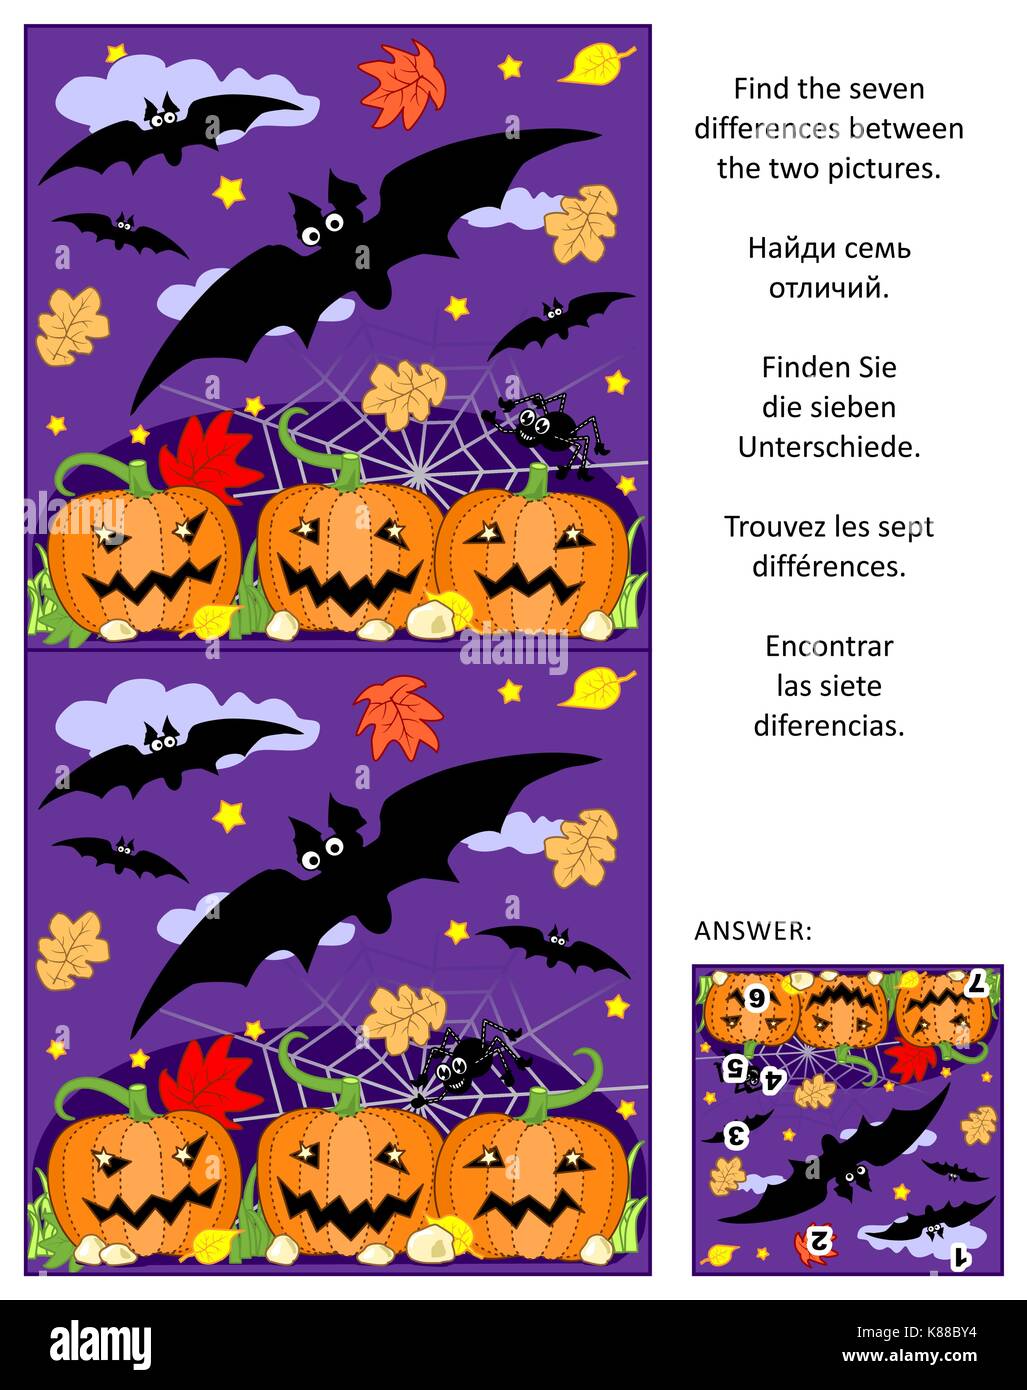 Halloween themed visual puzzle: Find the seven differences between the two pictures of flying bats, pumpkin field, spider. Answer included. Stock Vector